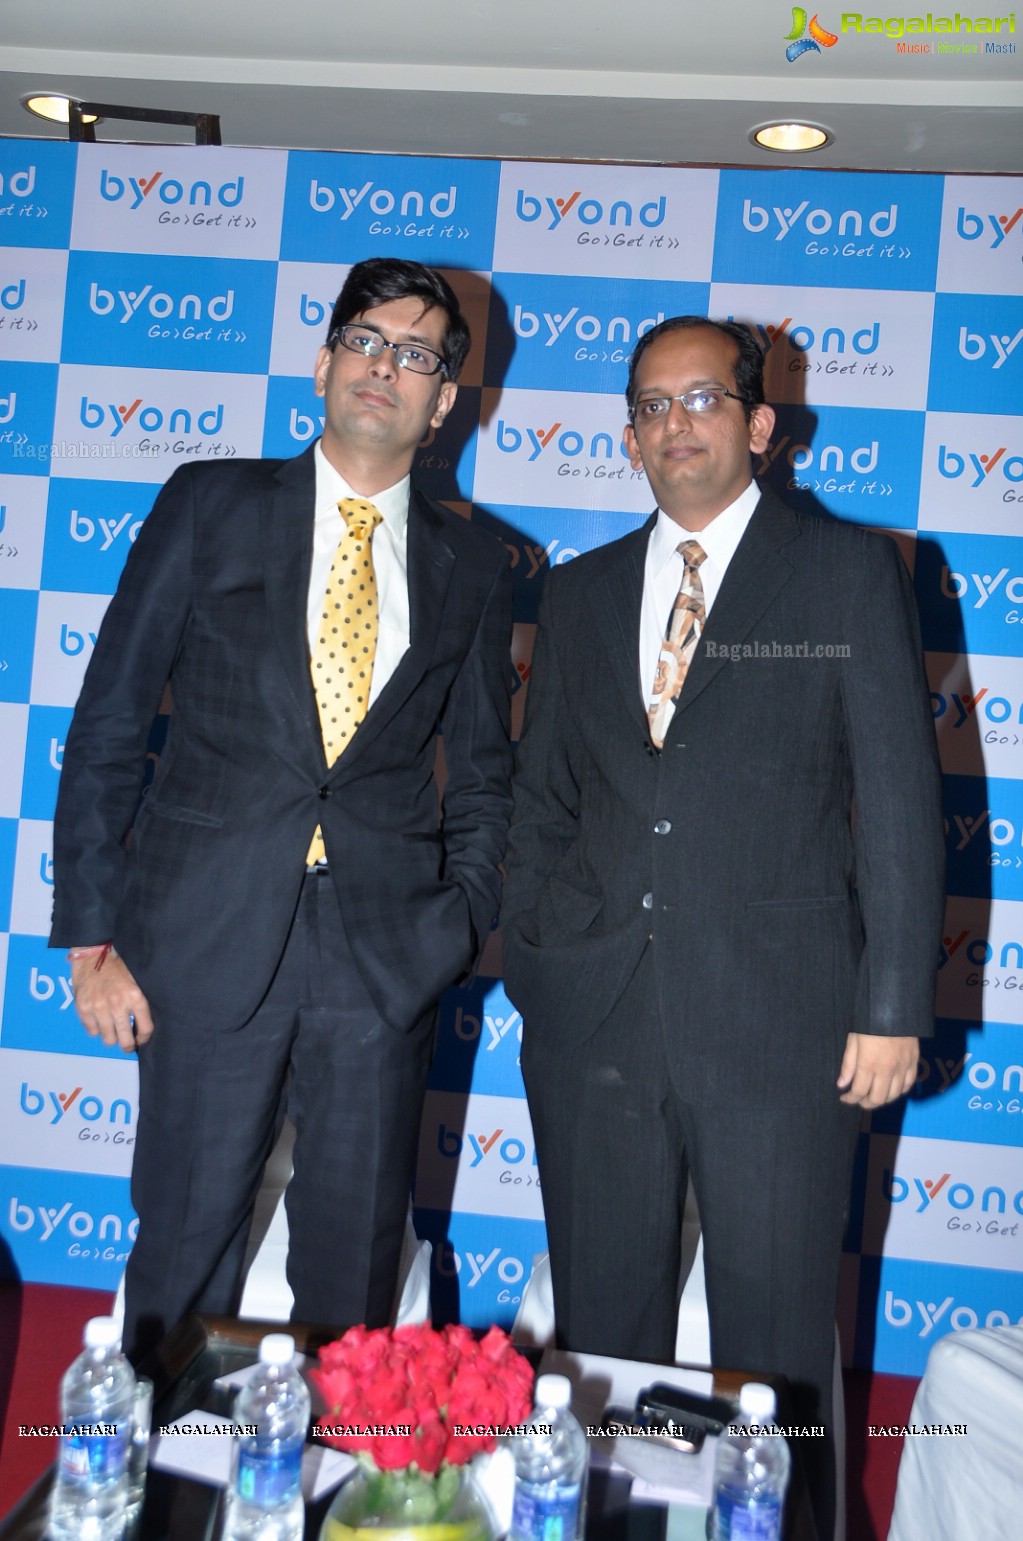 Byond Tech Electronics Tablet PC Launch, Hyderabad